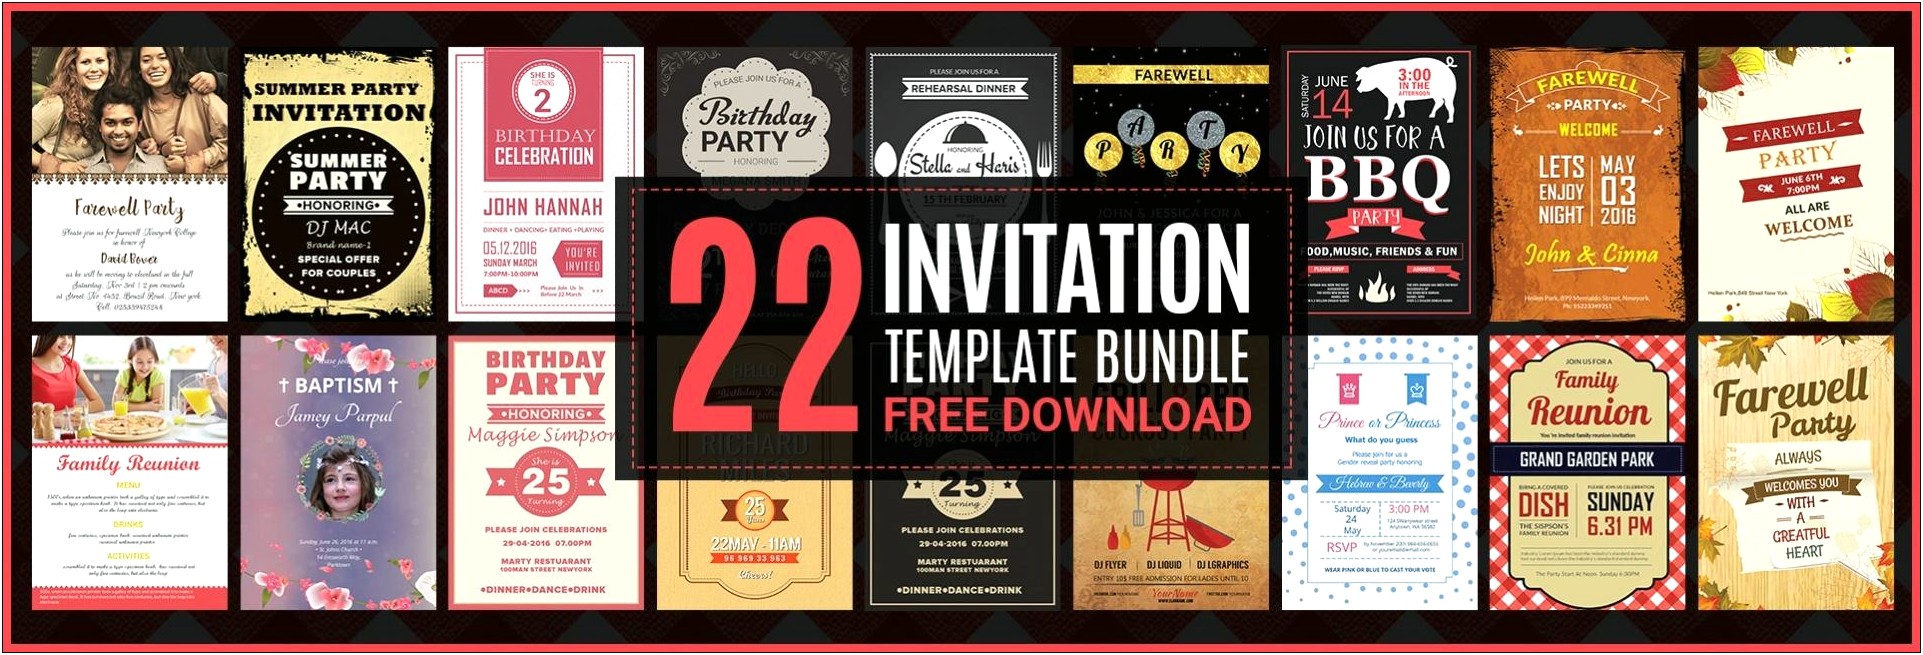 Free Invite Templates For Word 60's Style